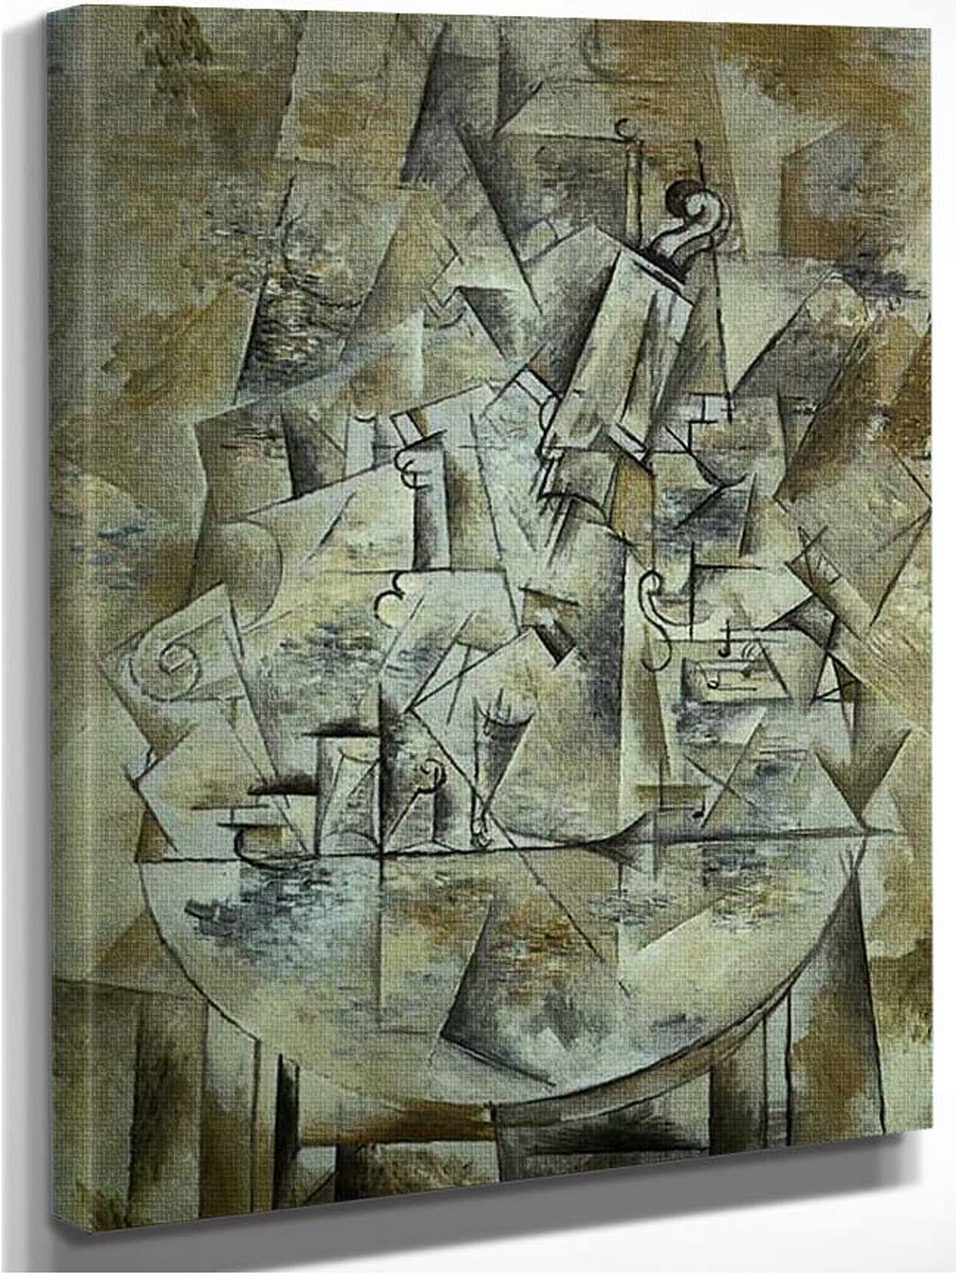 Pedestal Table By Georges Braque Art Reproduction From Wanford